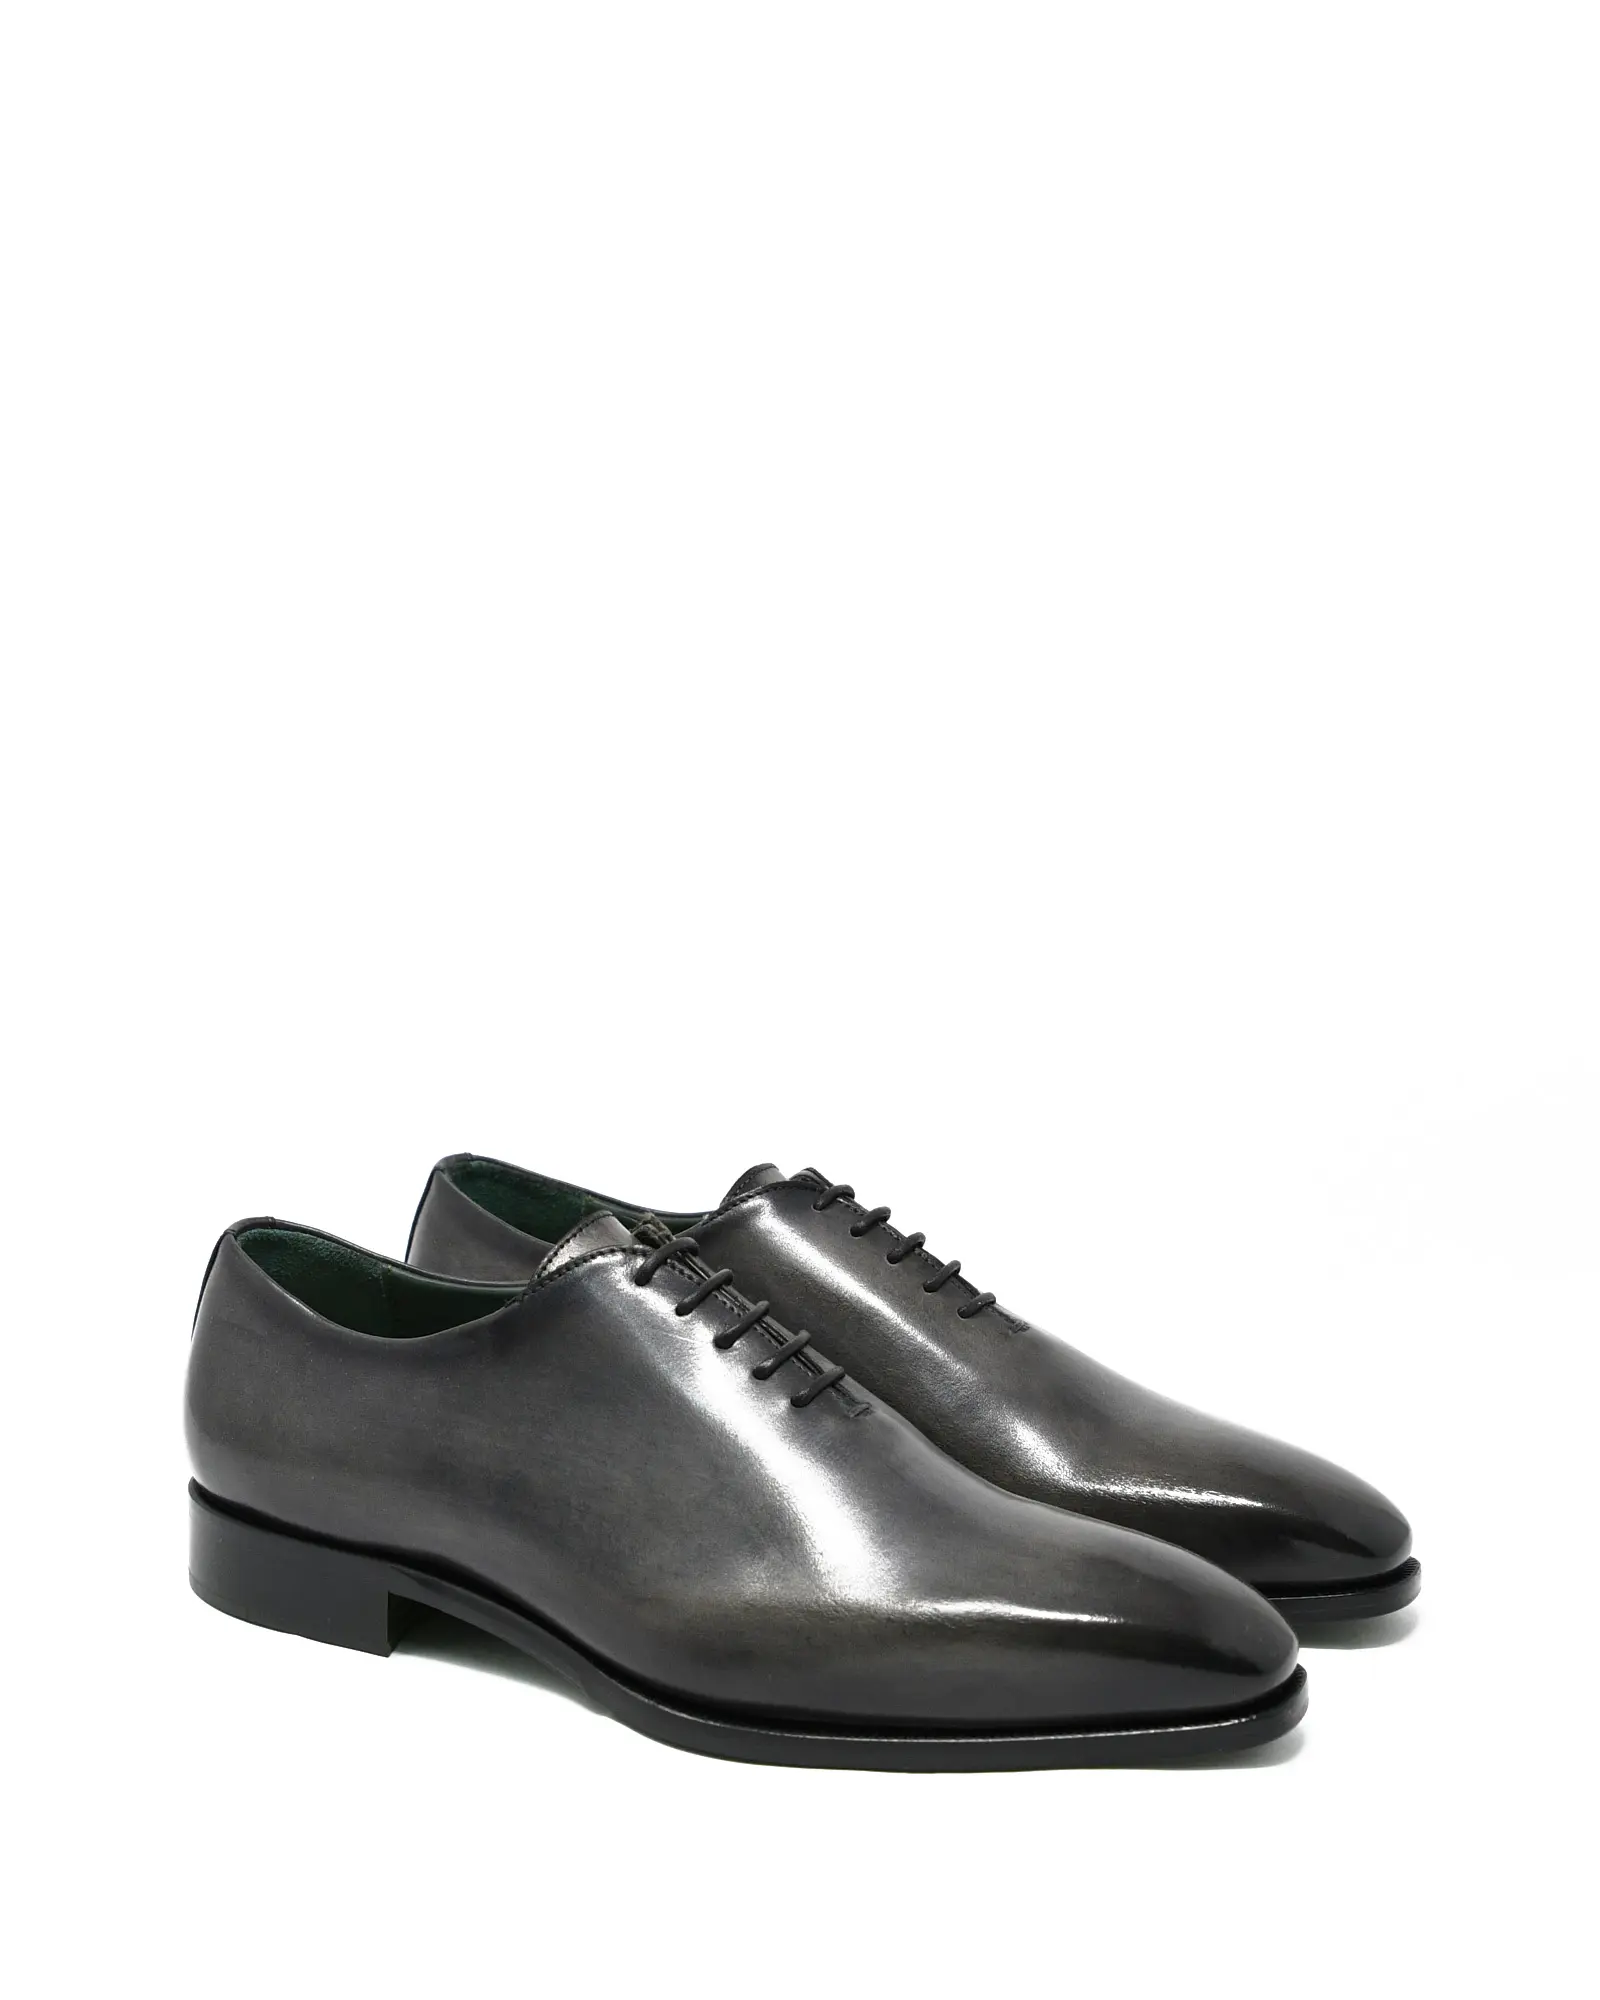 OXFORD LEATHER MEN SHOES to be used for formal occasion The production is 100% Made in Italy coloured by hand